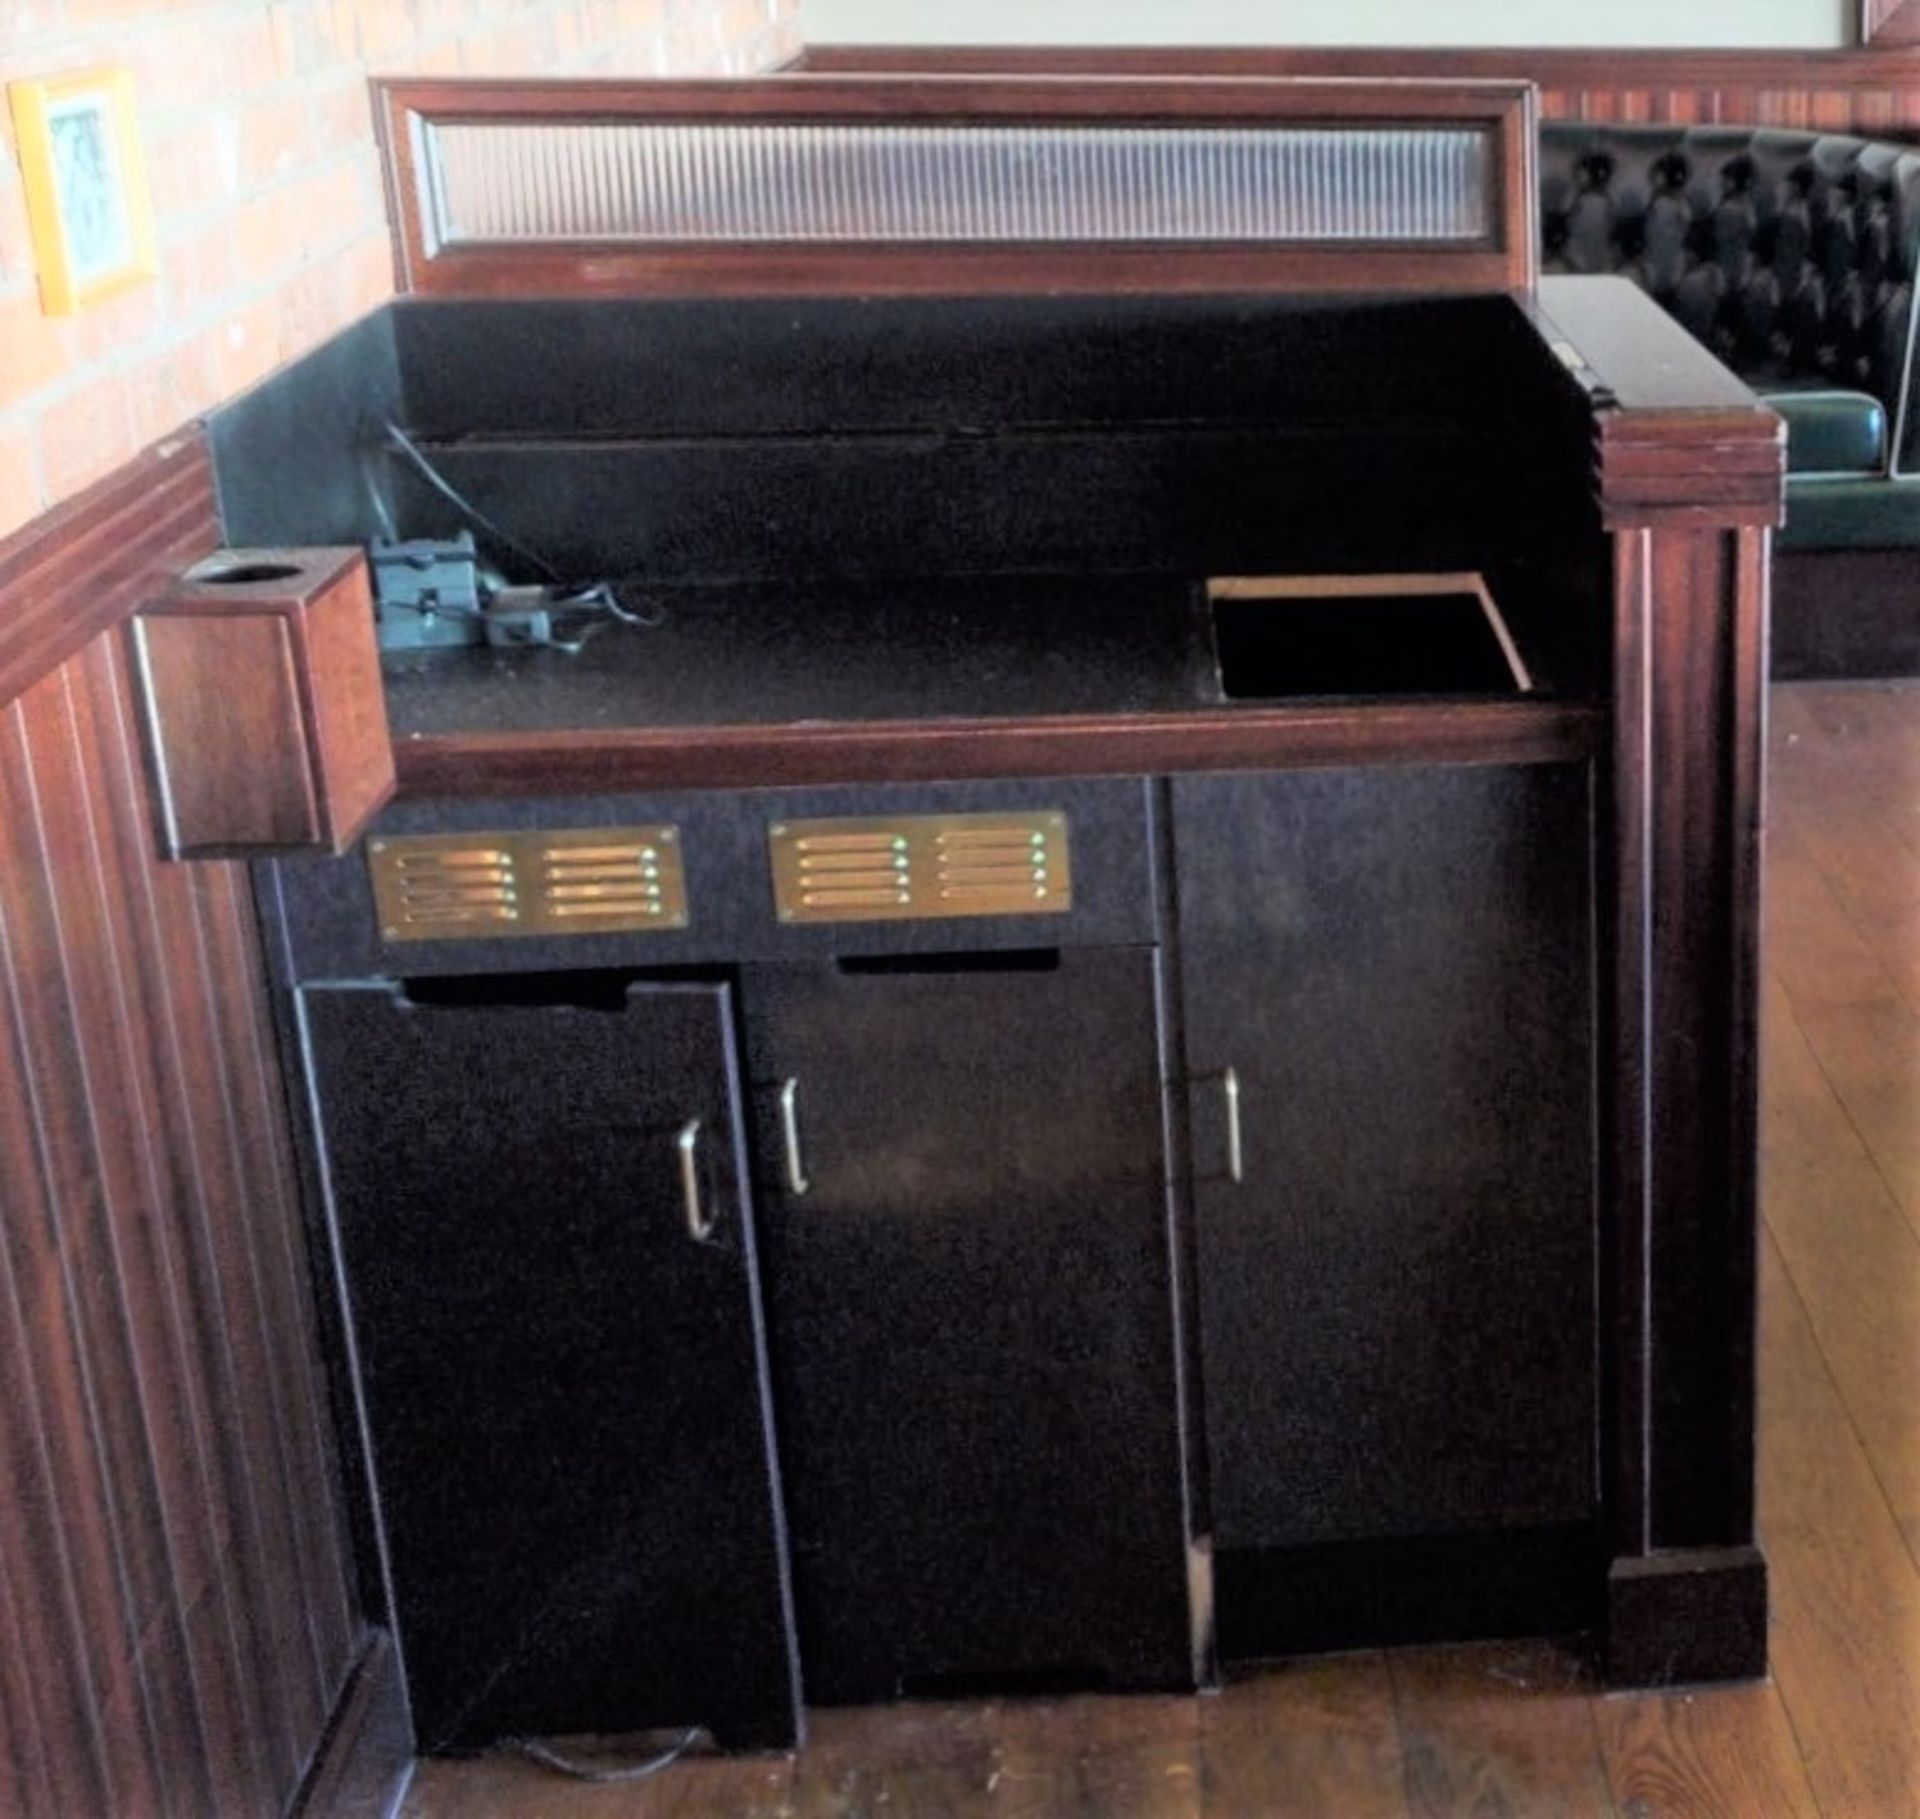 2 x Waiter Stations Featuring a Dark Wooden Finish, Menu Holders, Privacy Panels and Cupboards - - Image 3 of 8